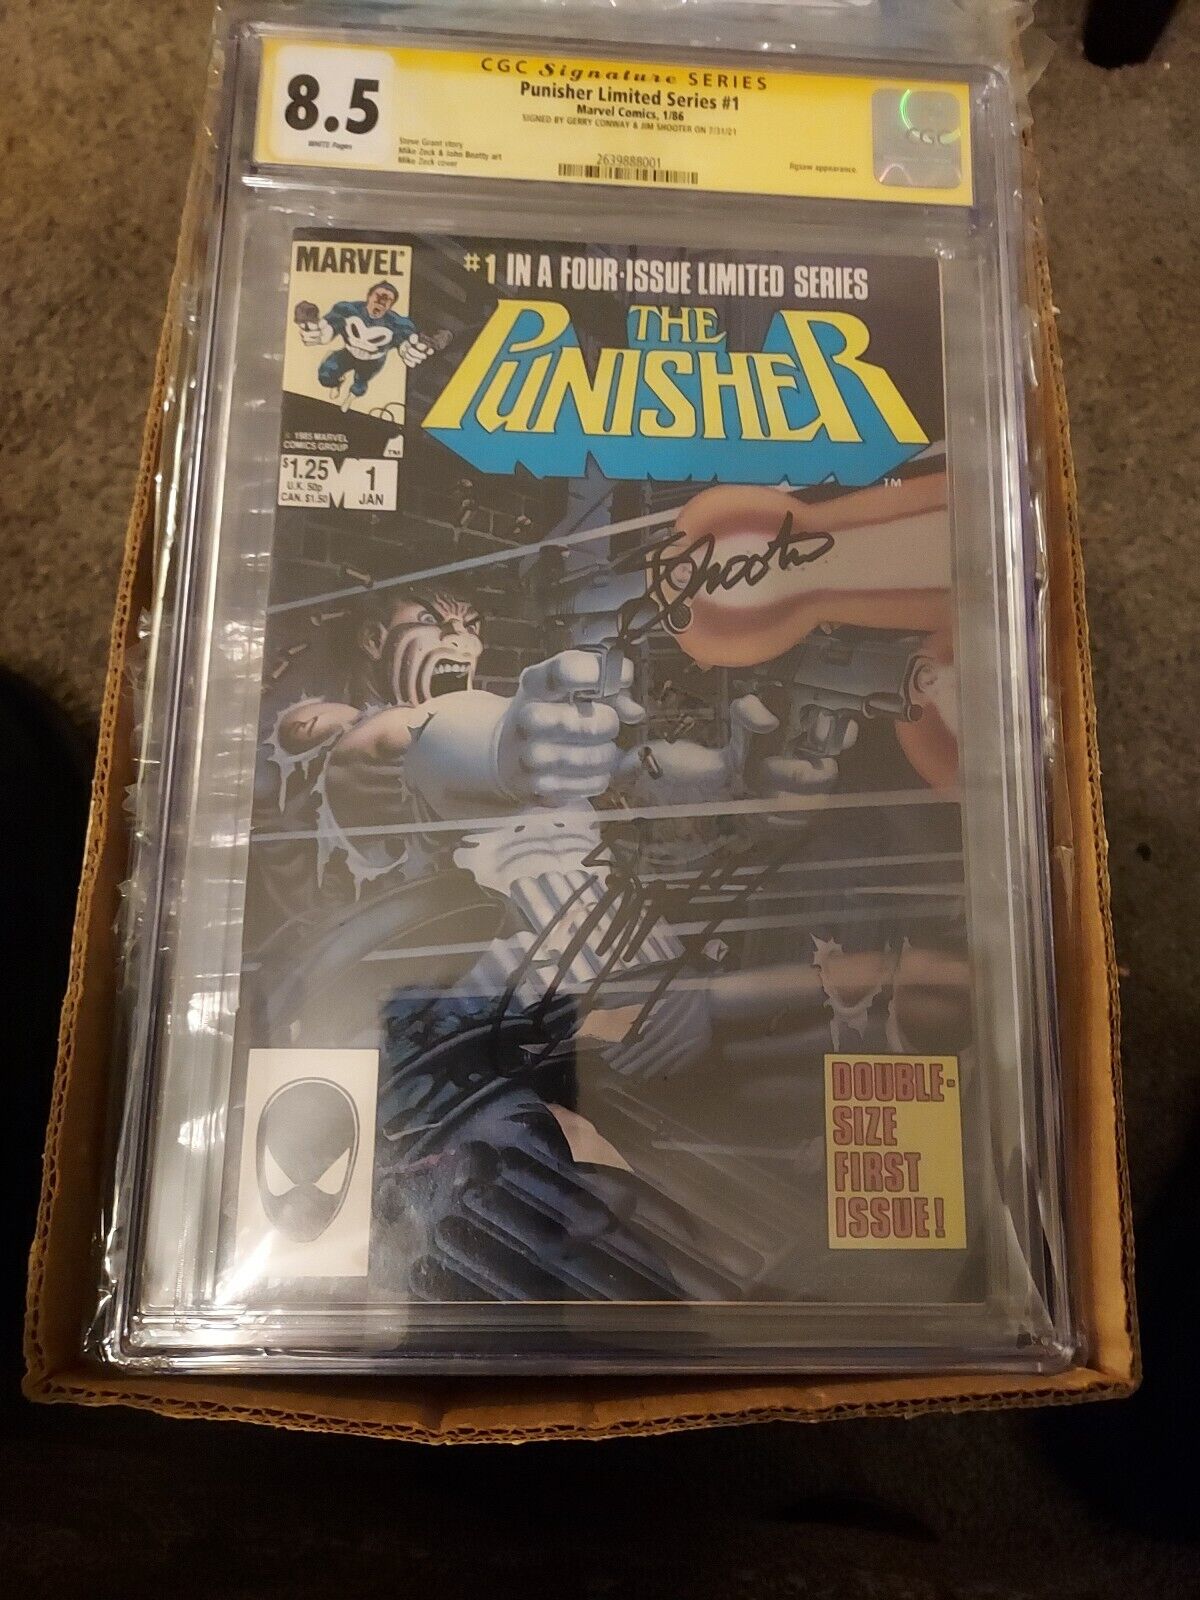 CGC SS 8.5 Punisher Limited Series #1 signed 2x  by Gerry Conway & Jim Shooter 